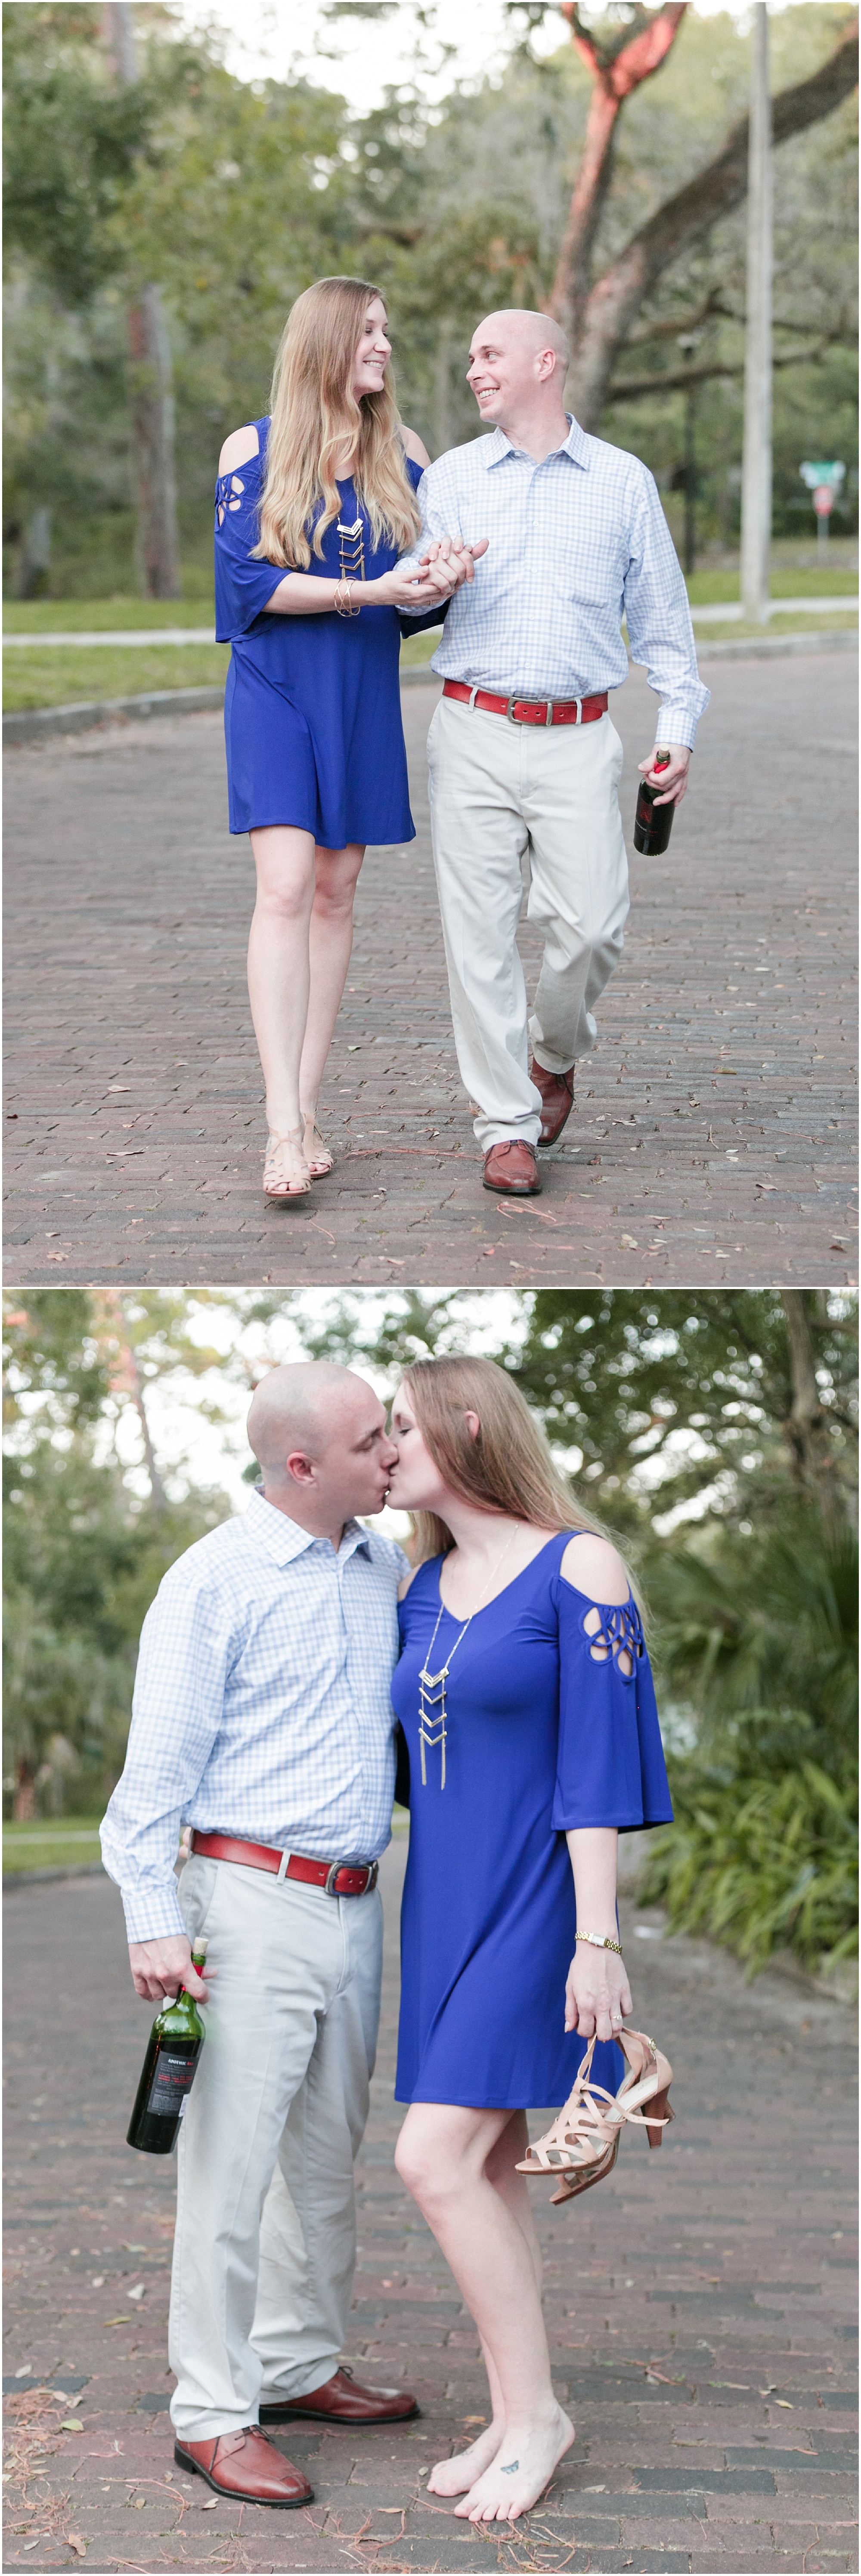 Outdoor engagement session couple walking and kissing each other at the end of the day.